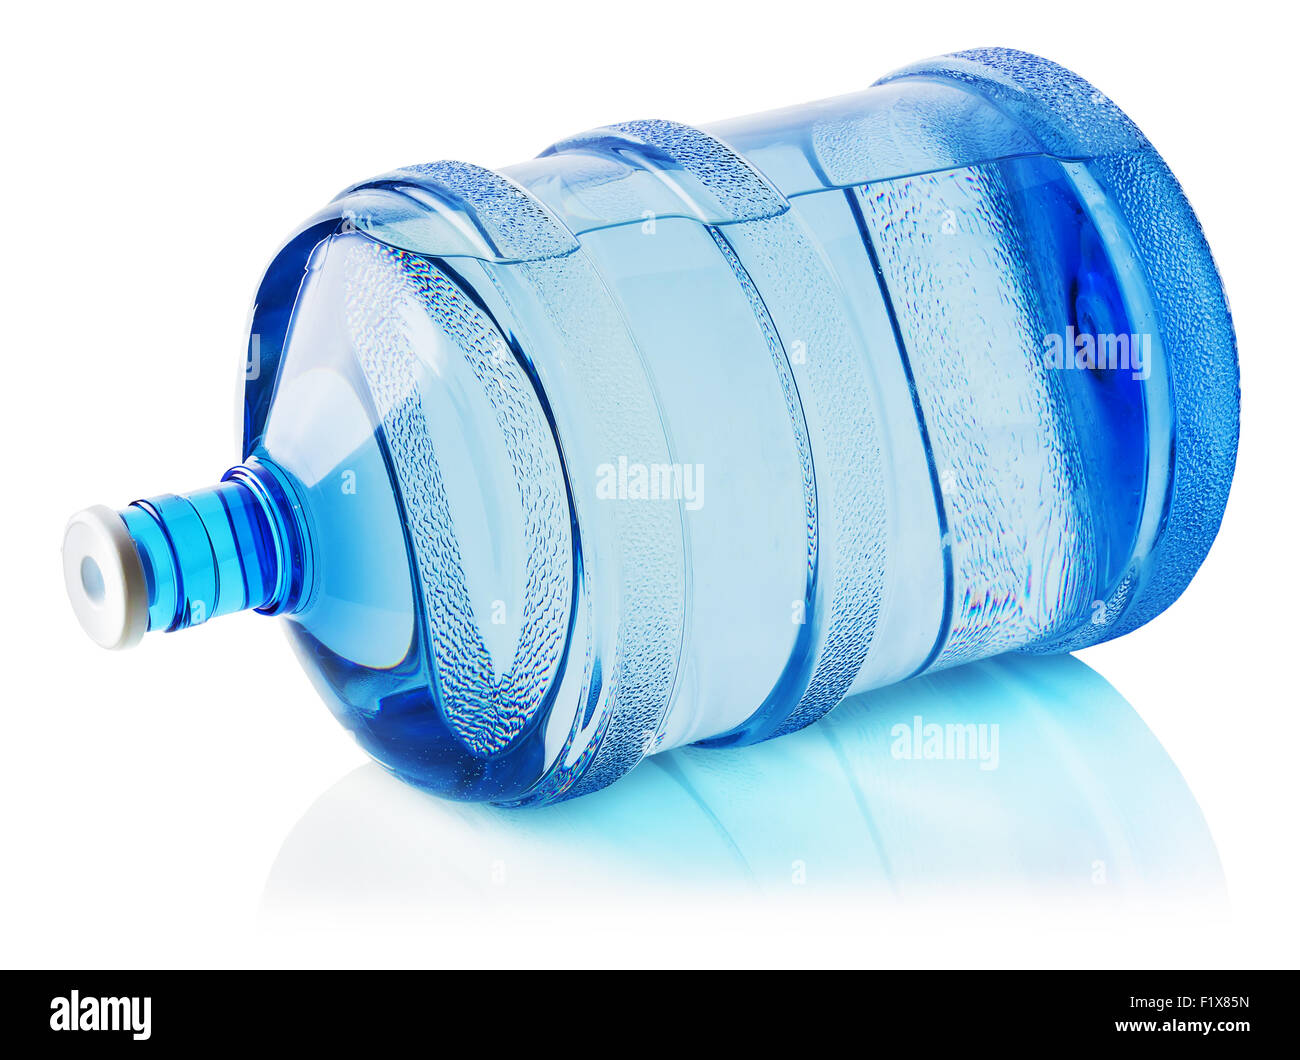 Big bottle of water. Stock Photo by ©jurisam 5800182